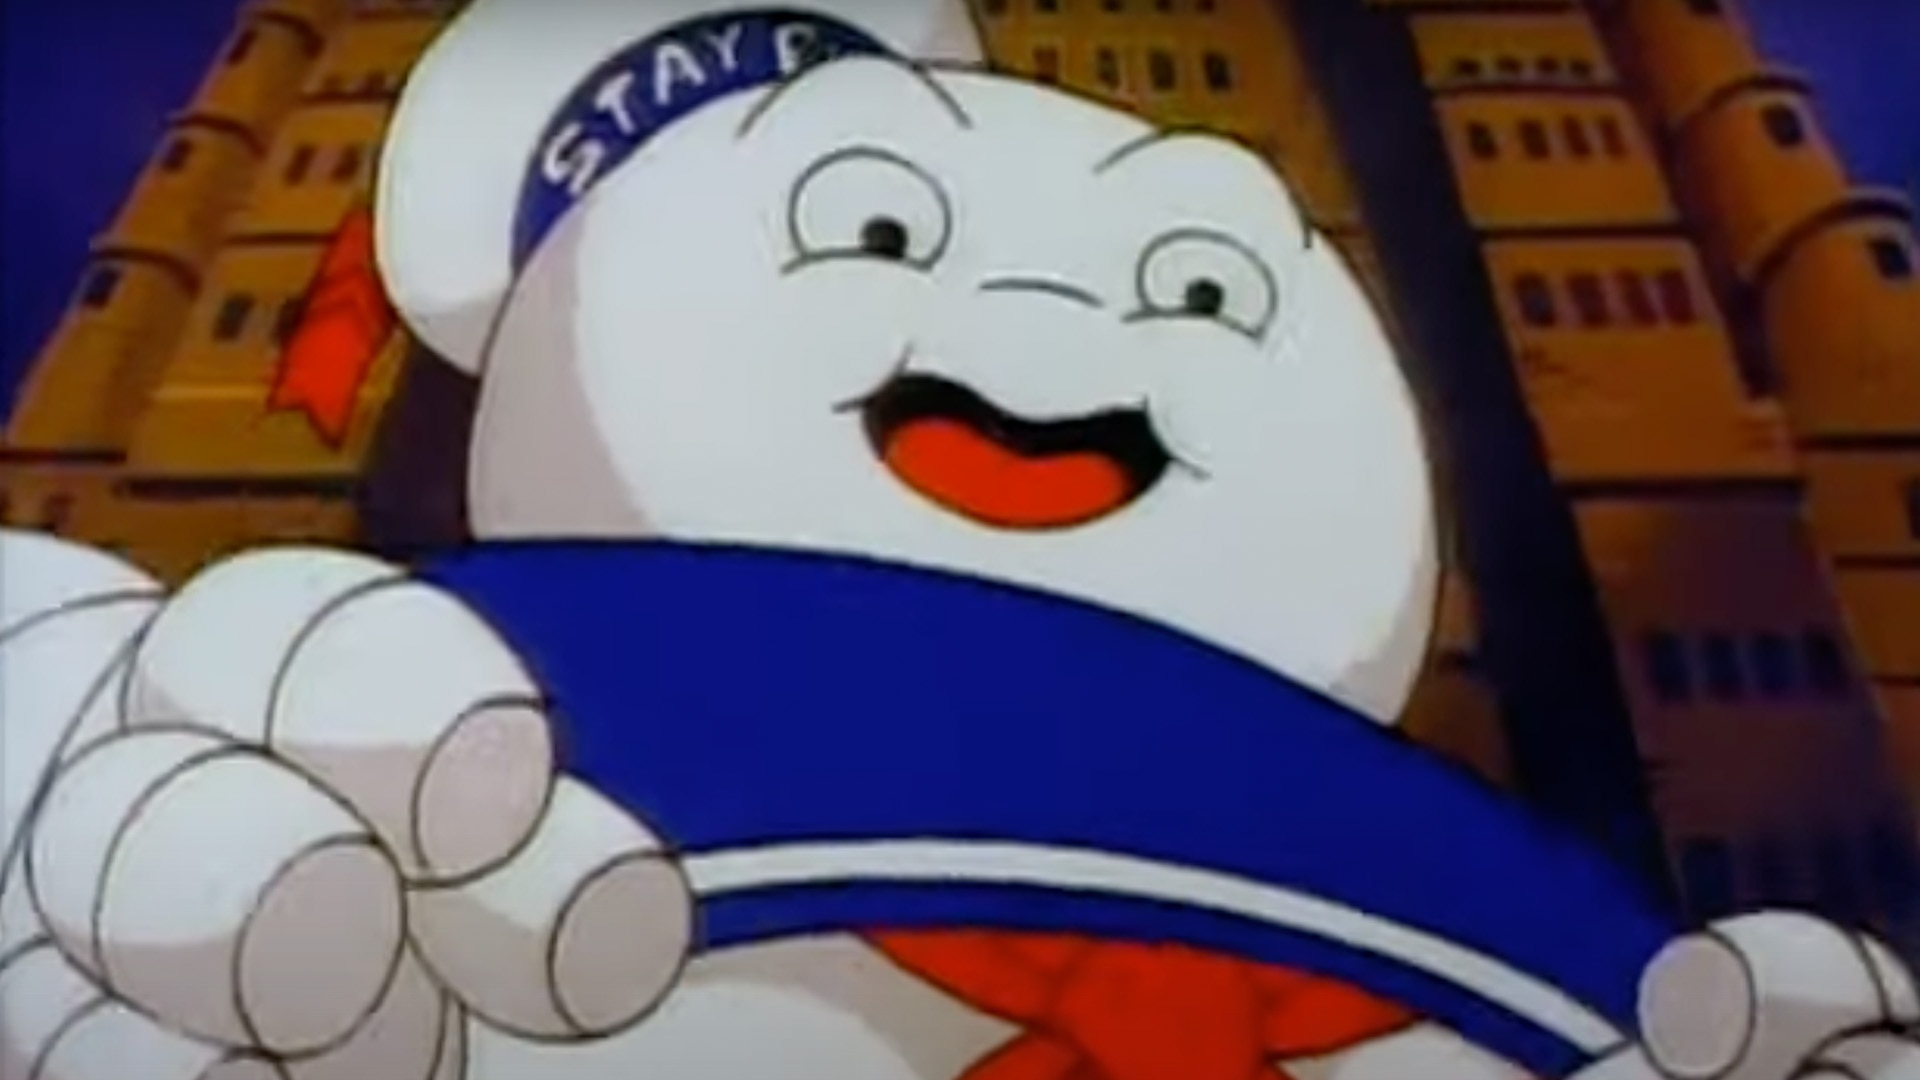 Ghostbusters' marshmallow-covered ending gets cartoon recreation starring  'The Real Ghostbusters' - Ghostbusters News